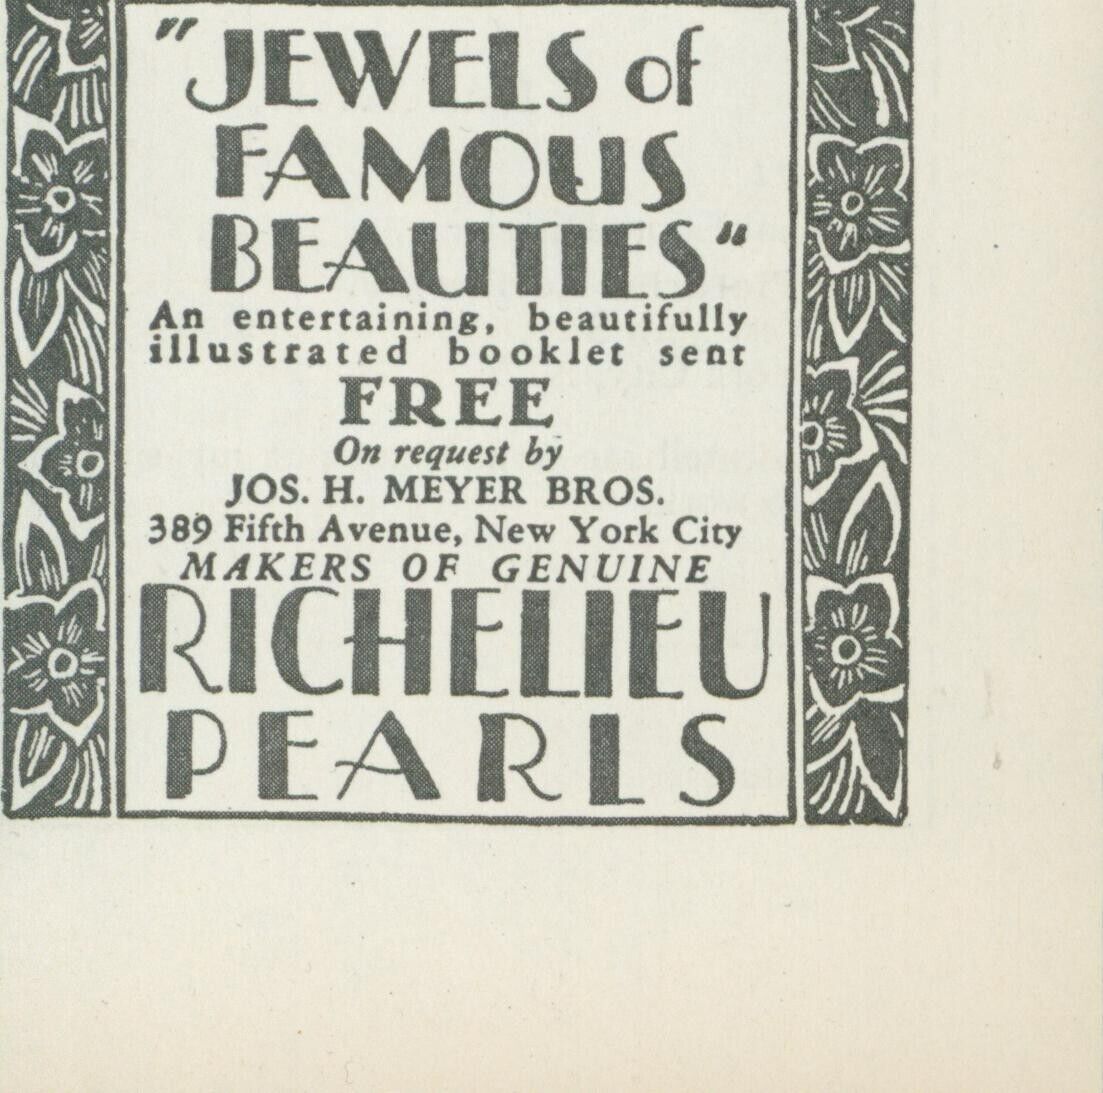 1928 Jewels Of Famous Beauties Richelieu Pearls Booklet Offer Vtg Print Ad PR3